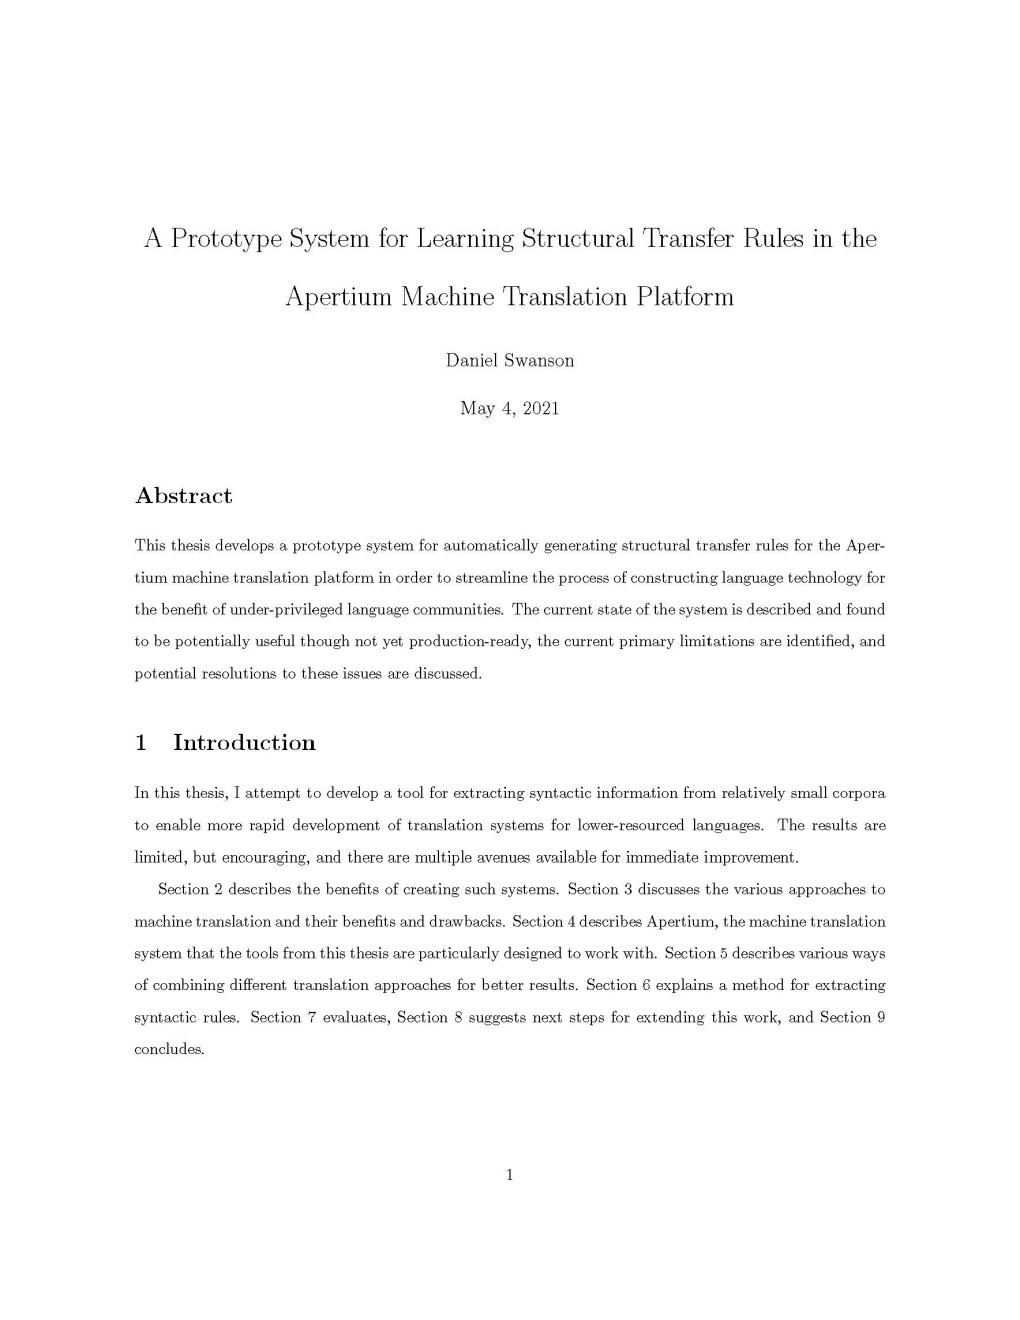 A Prototype System for Learning Structural Transfer Rules in The